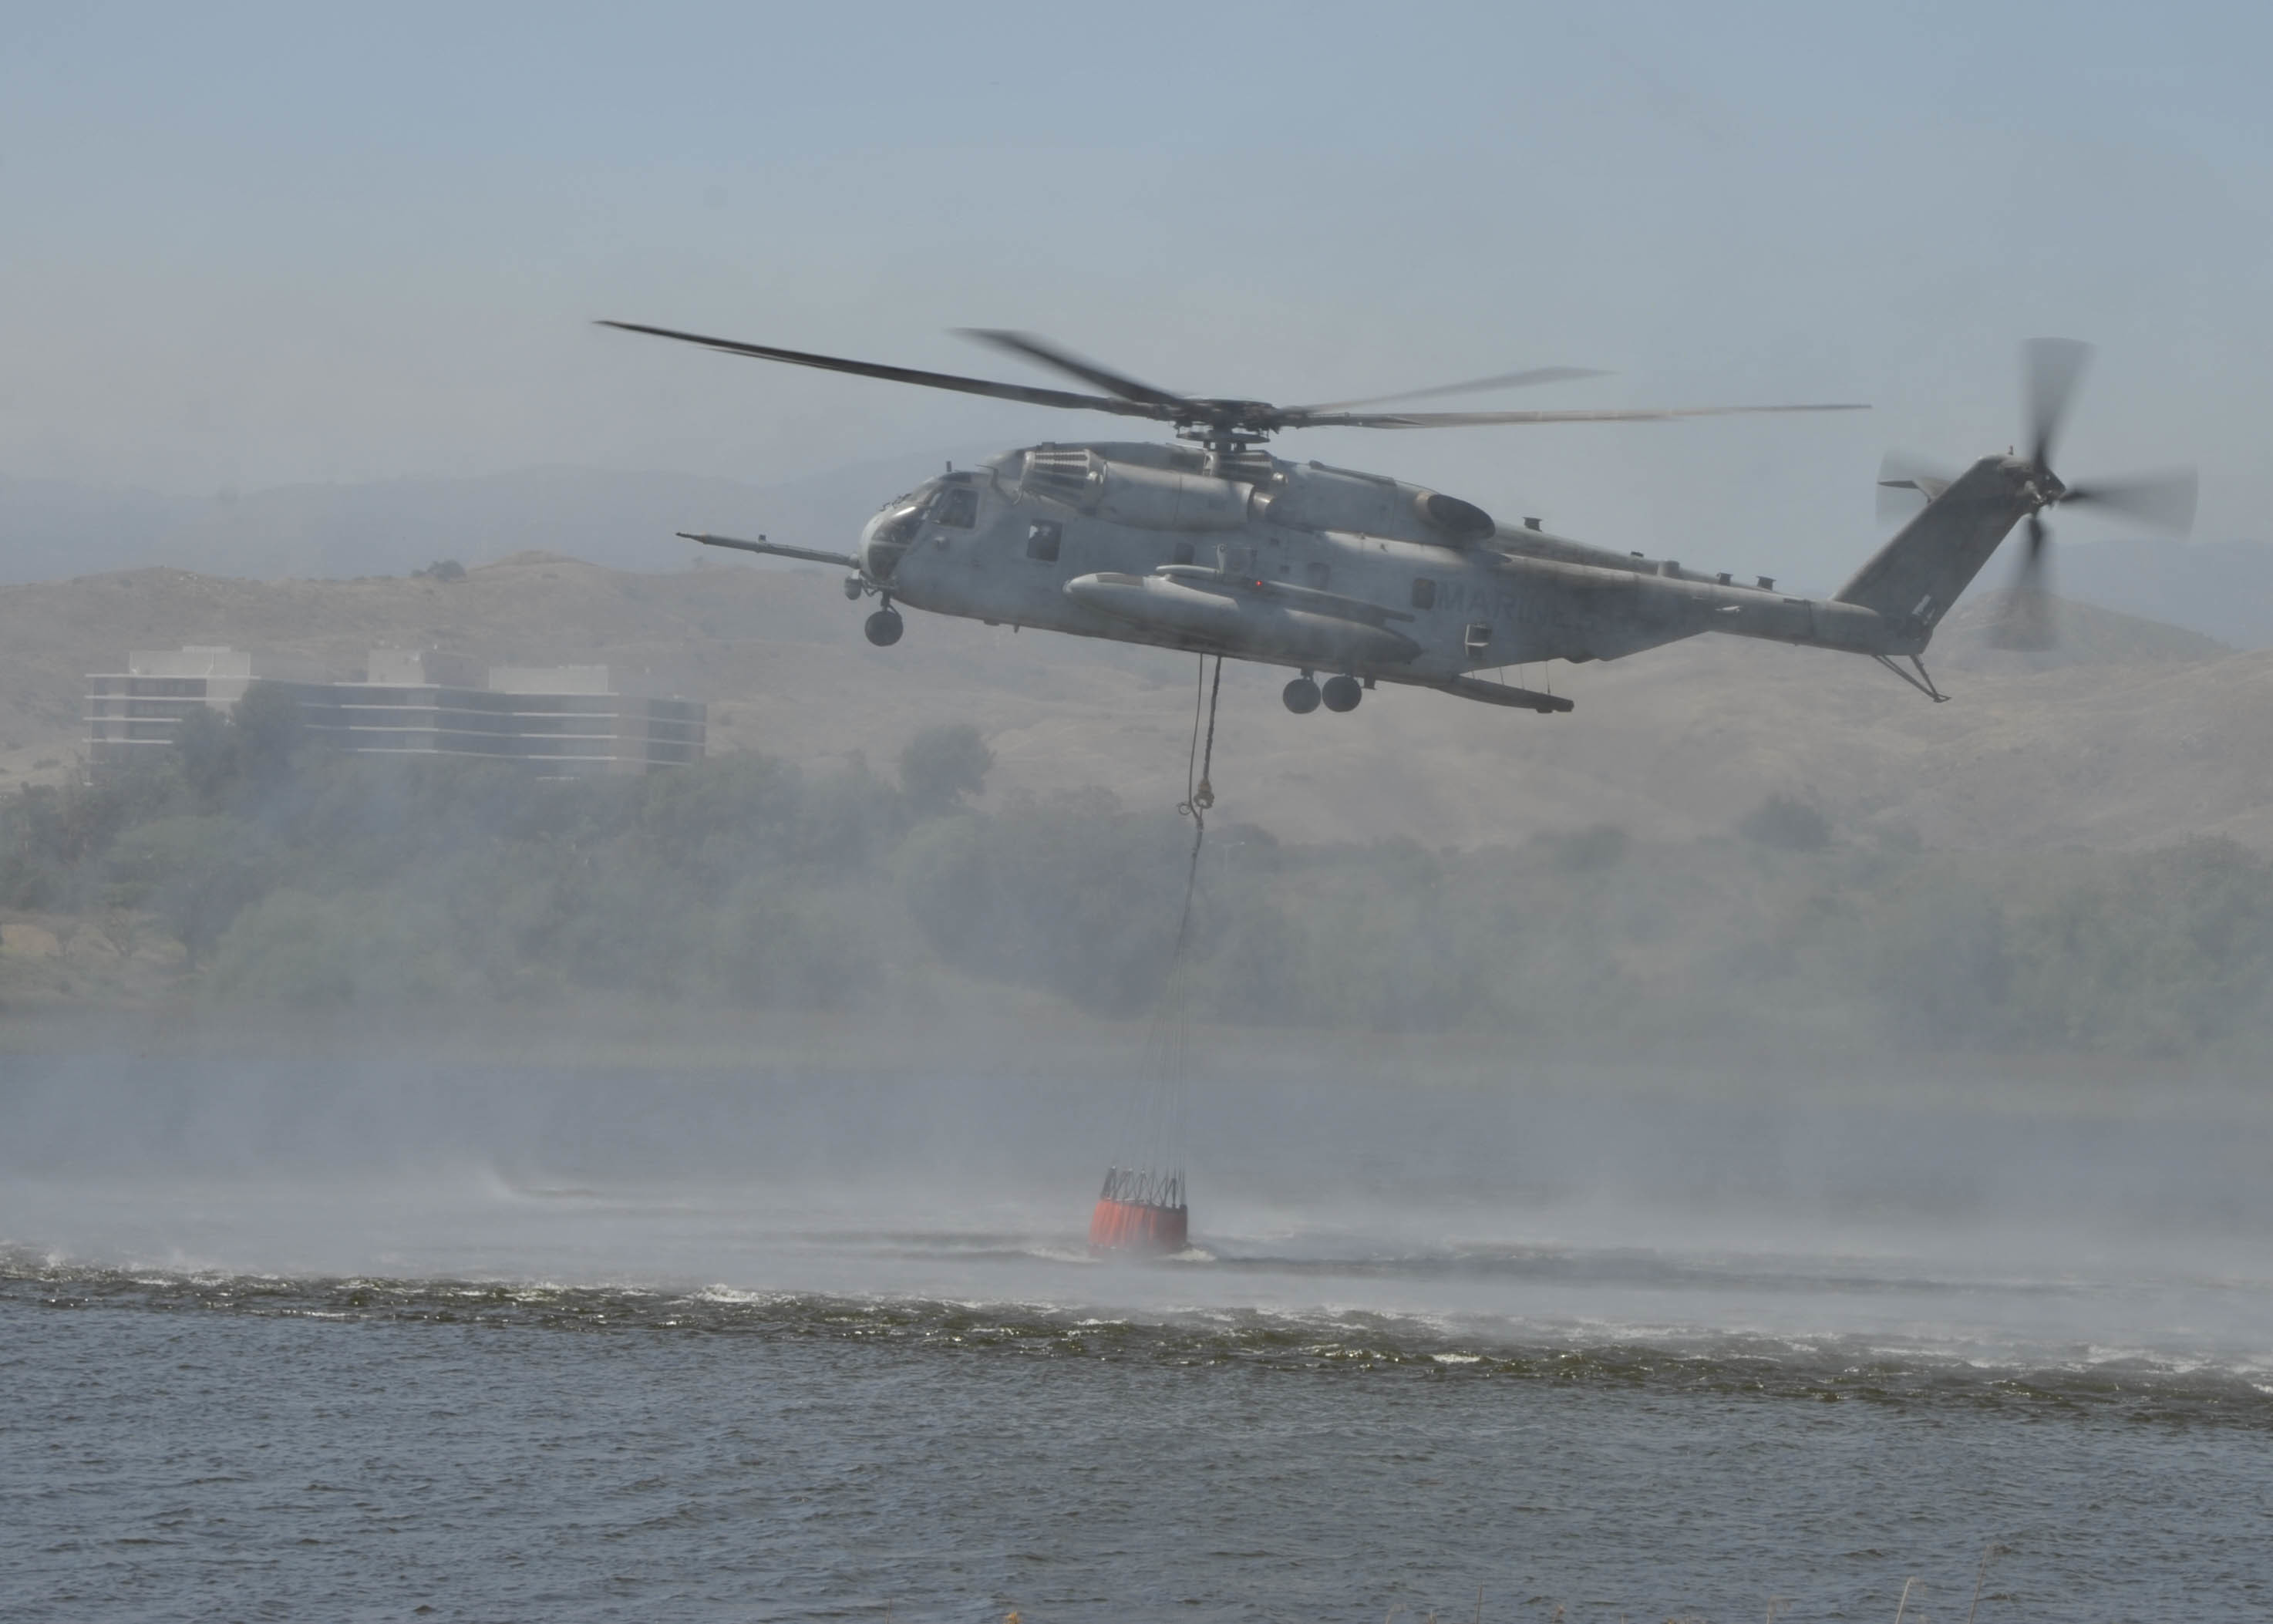 A CH-53E Sea Stallion from the “Flying Tigers” of Heavy Helicopter Squadron 361 pulls water from Lake O’Neill into a 420-gallon suspended bucket during a demonstration at the 2017 Wildland Firefighting Exercise at Lake O’Neill.